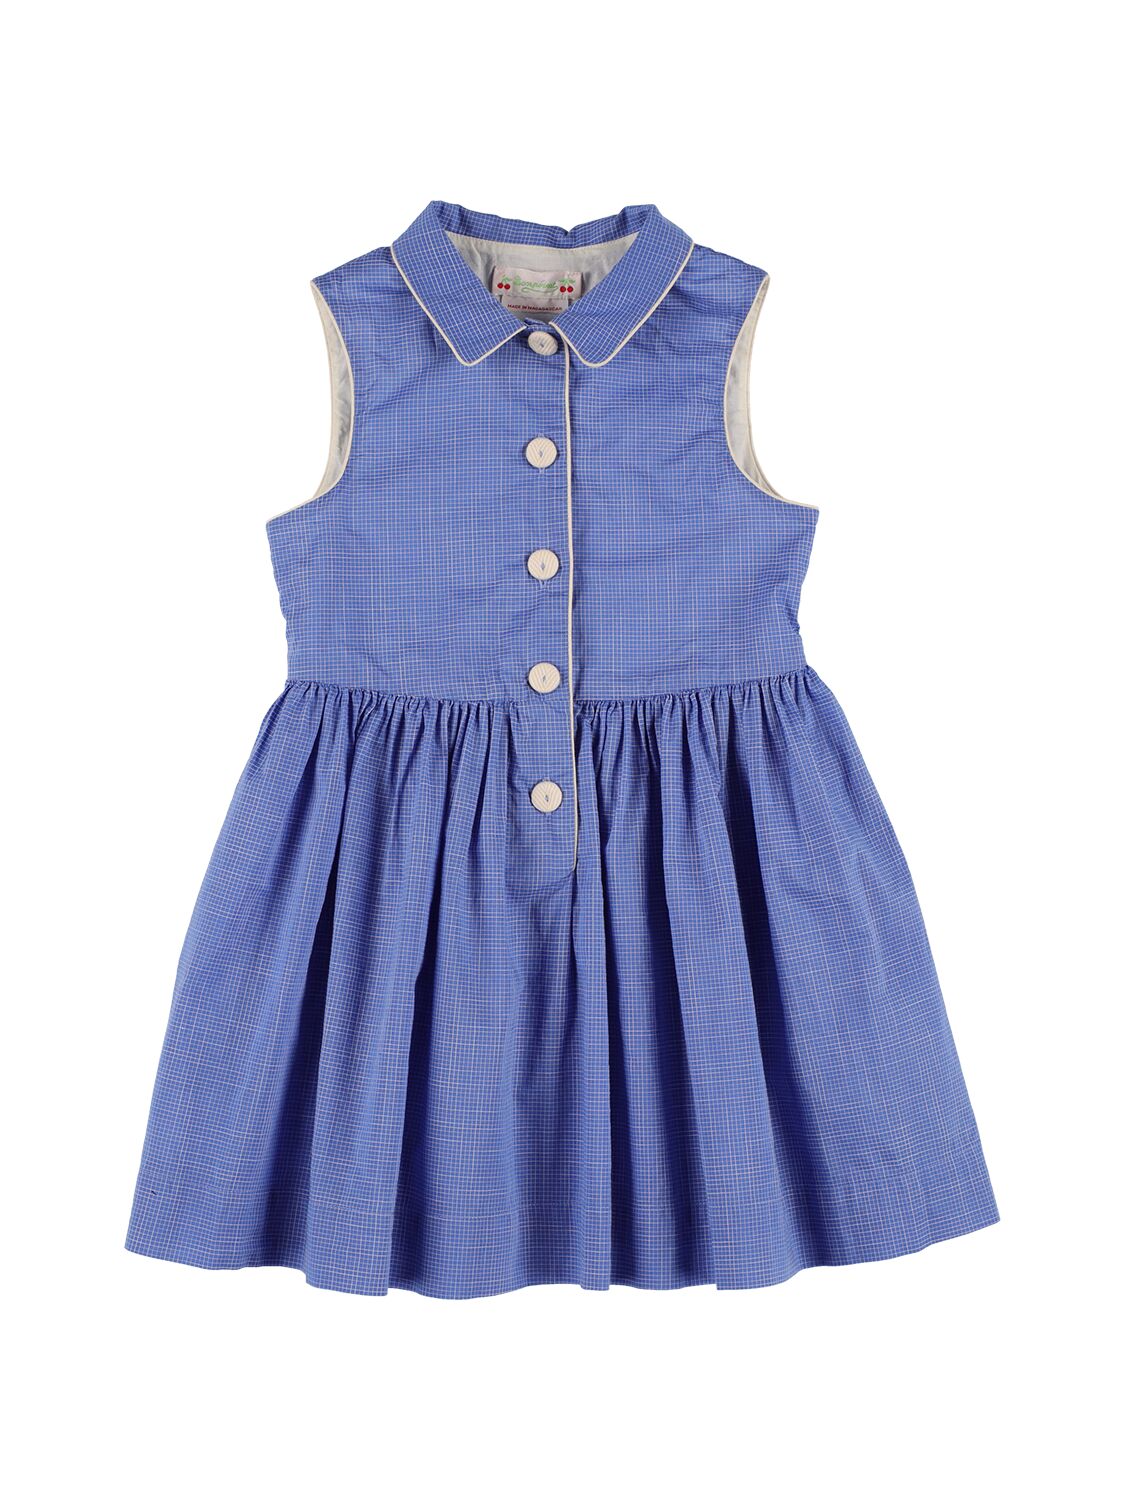 Bonpoint Kids' Cotton Chambray Dress In Blue